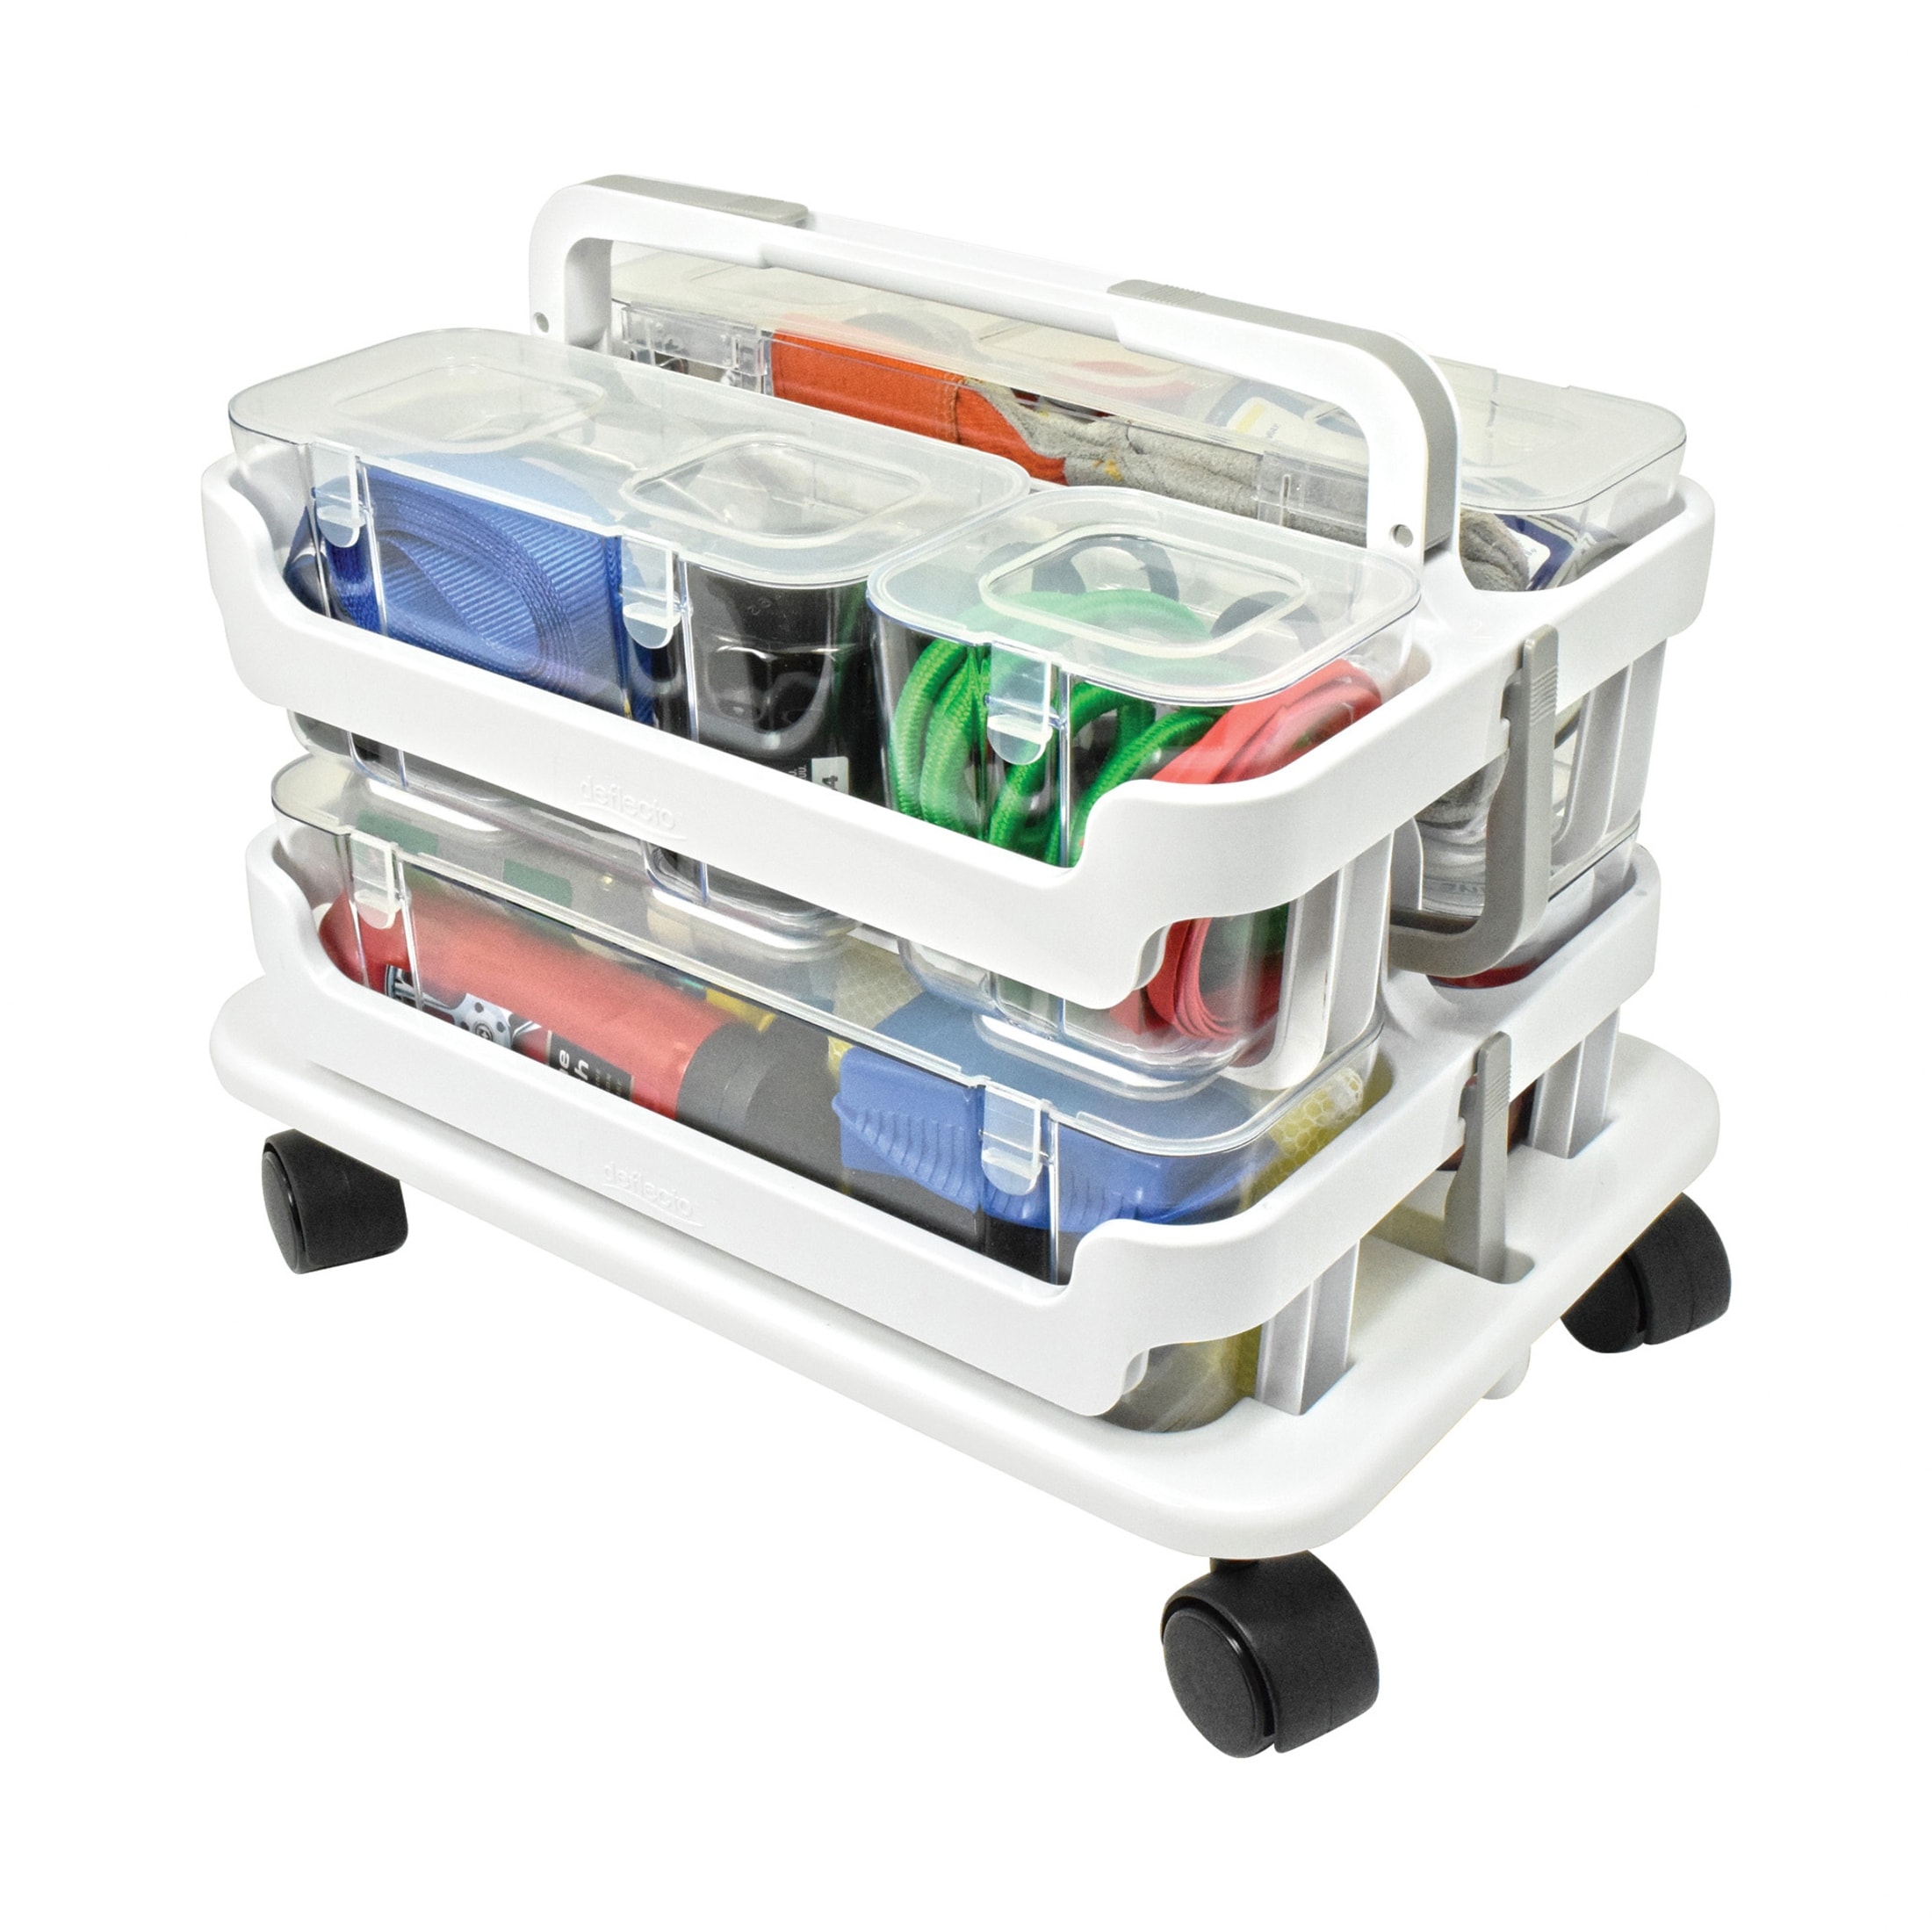 https://ak1.ostkcdn.com/images/products/is/images/direct/93c943a5080b74733bd4392410ab249f1c5e785a/Deflecto-Stackable-Caddy-Organizer.jpg